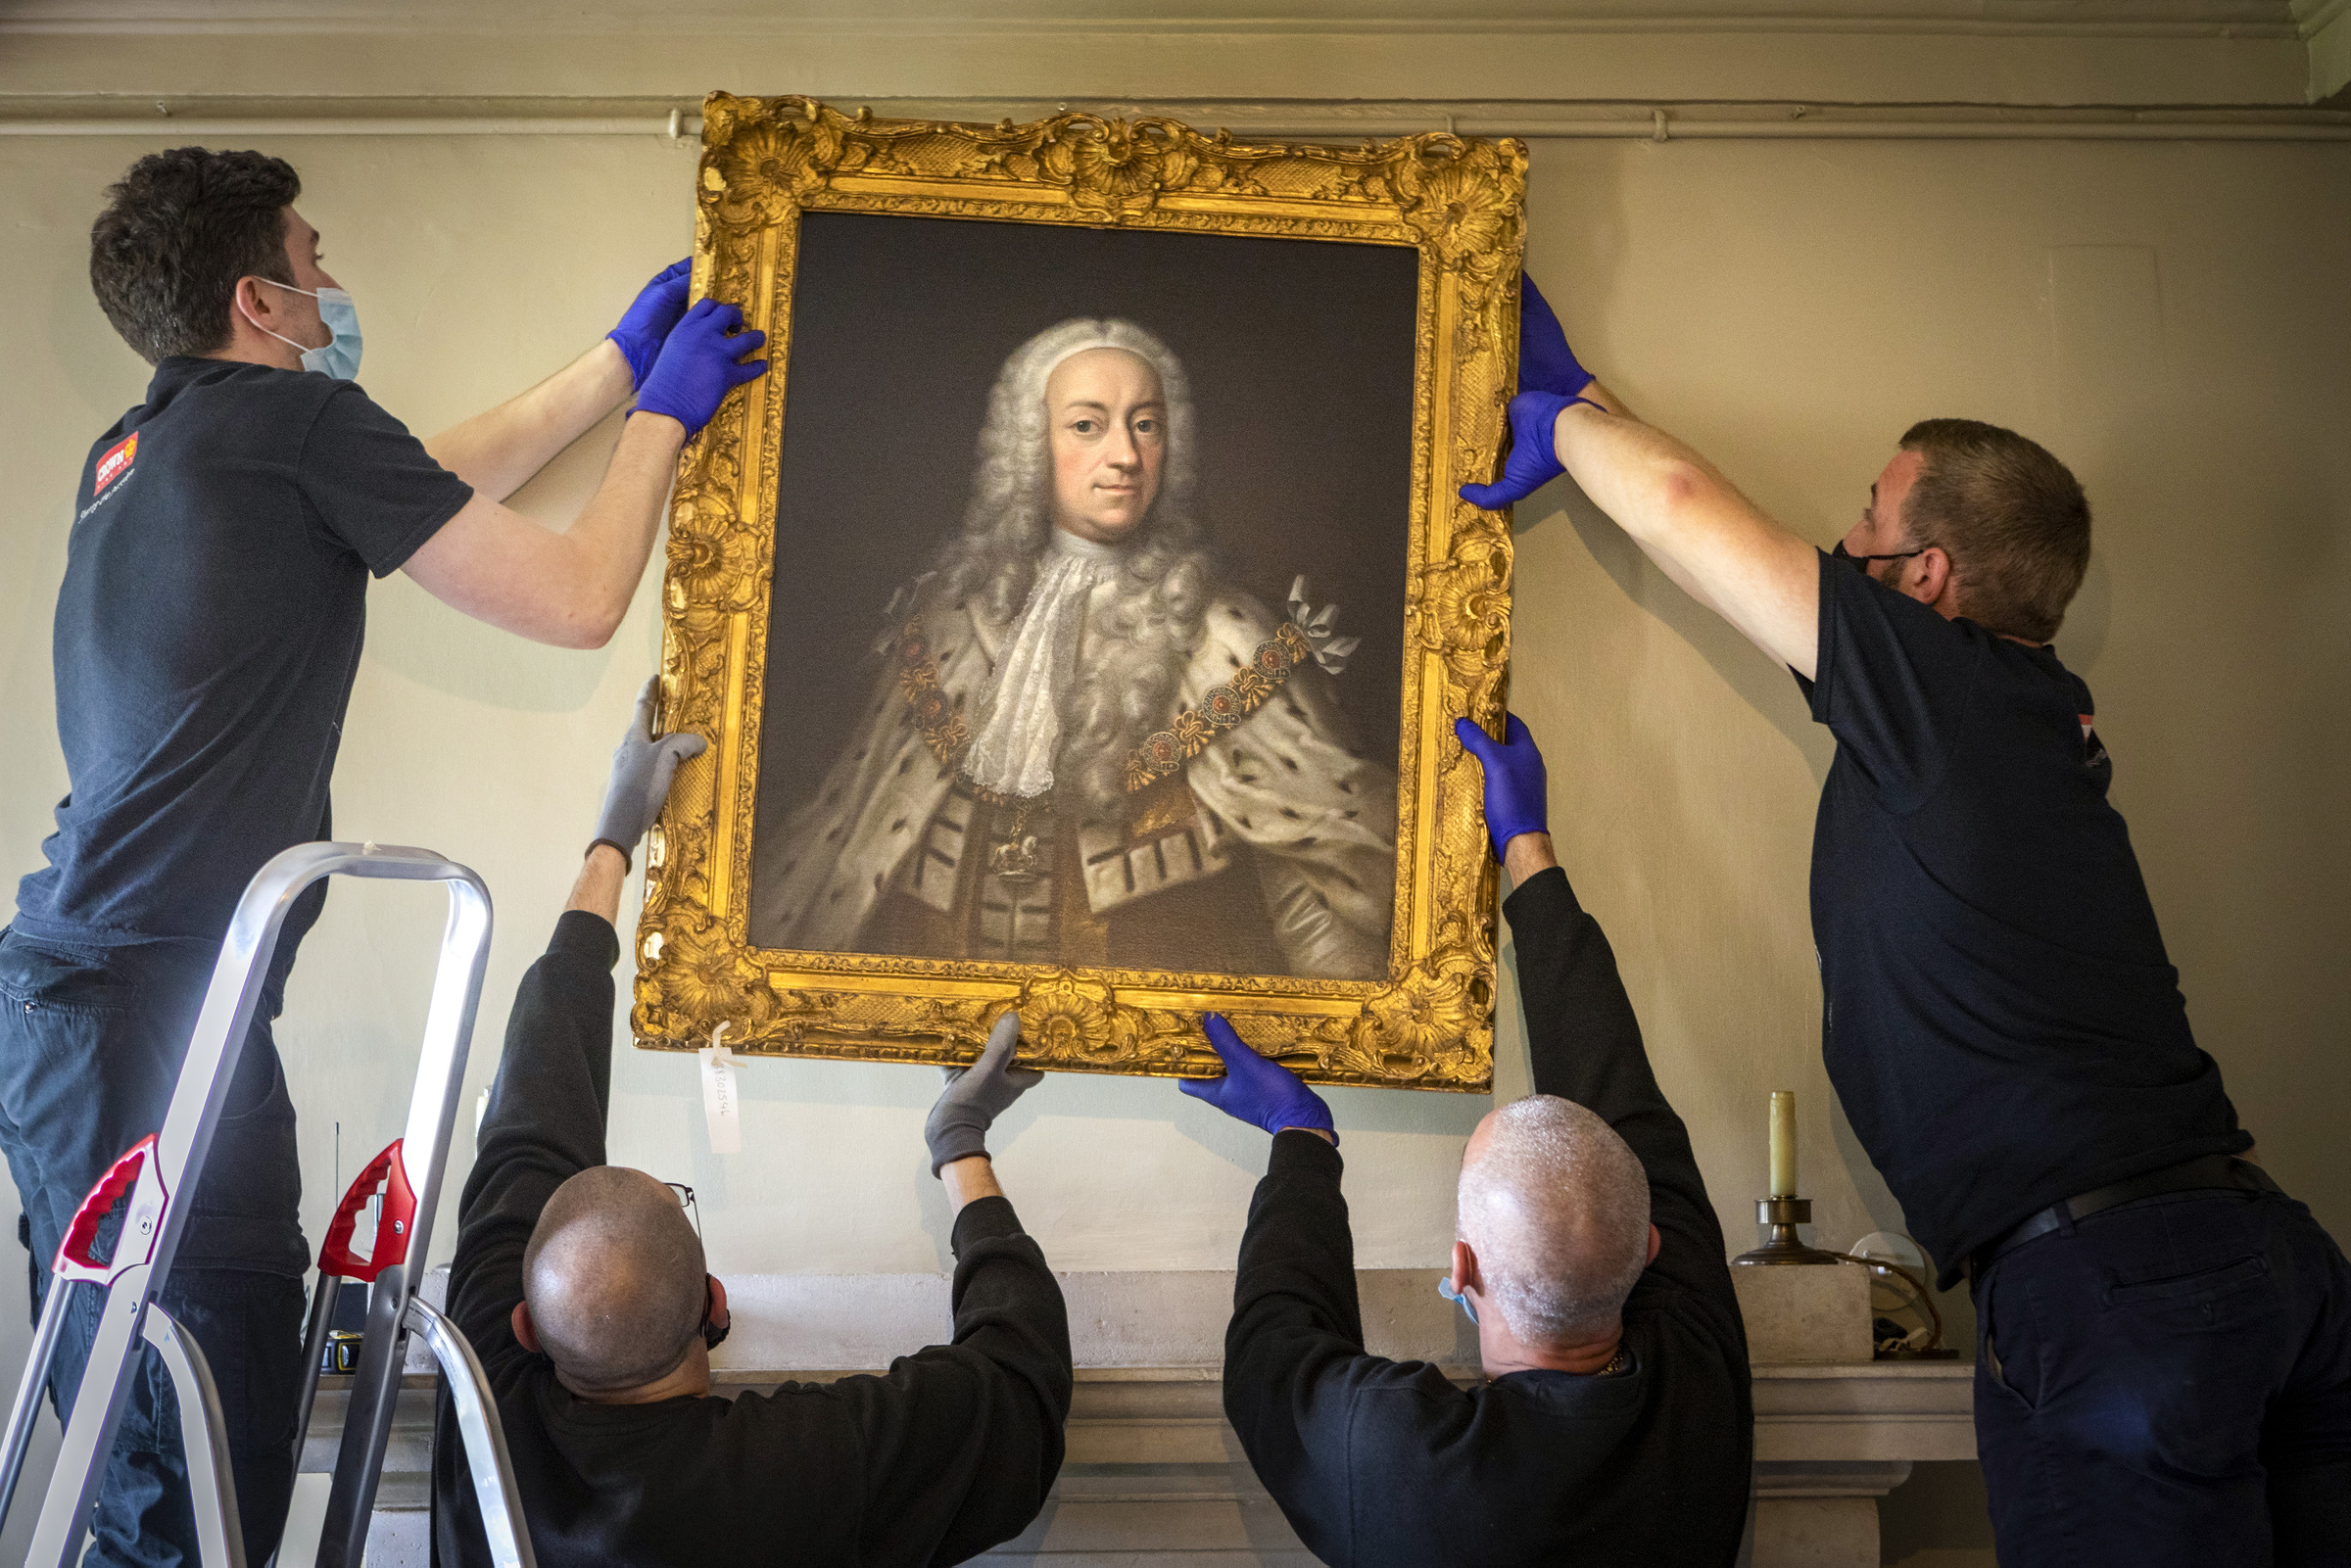 Contractors rehang a painting at Marble Hill